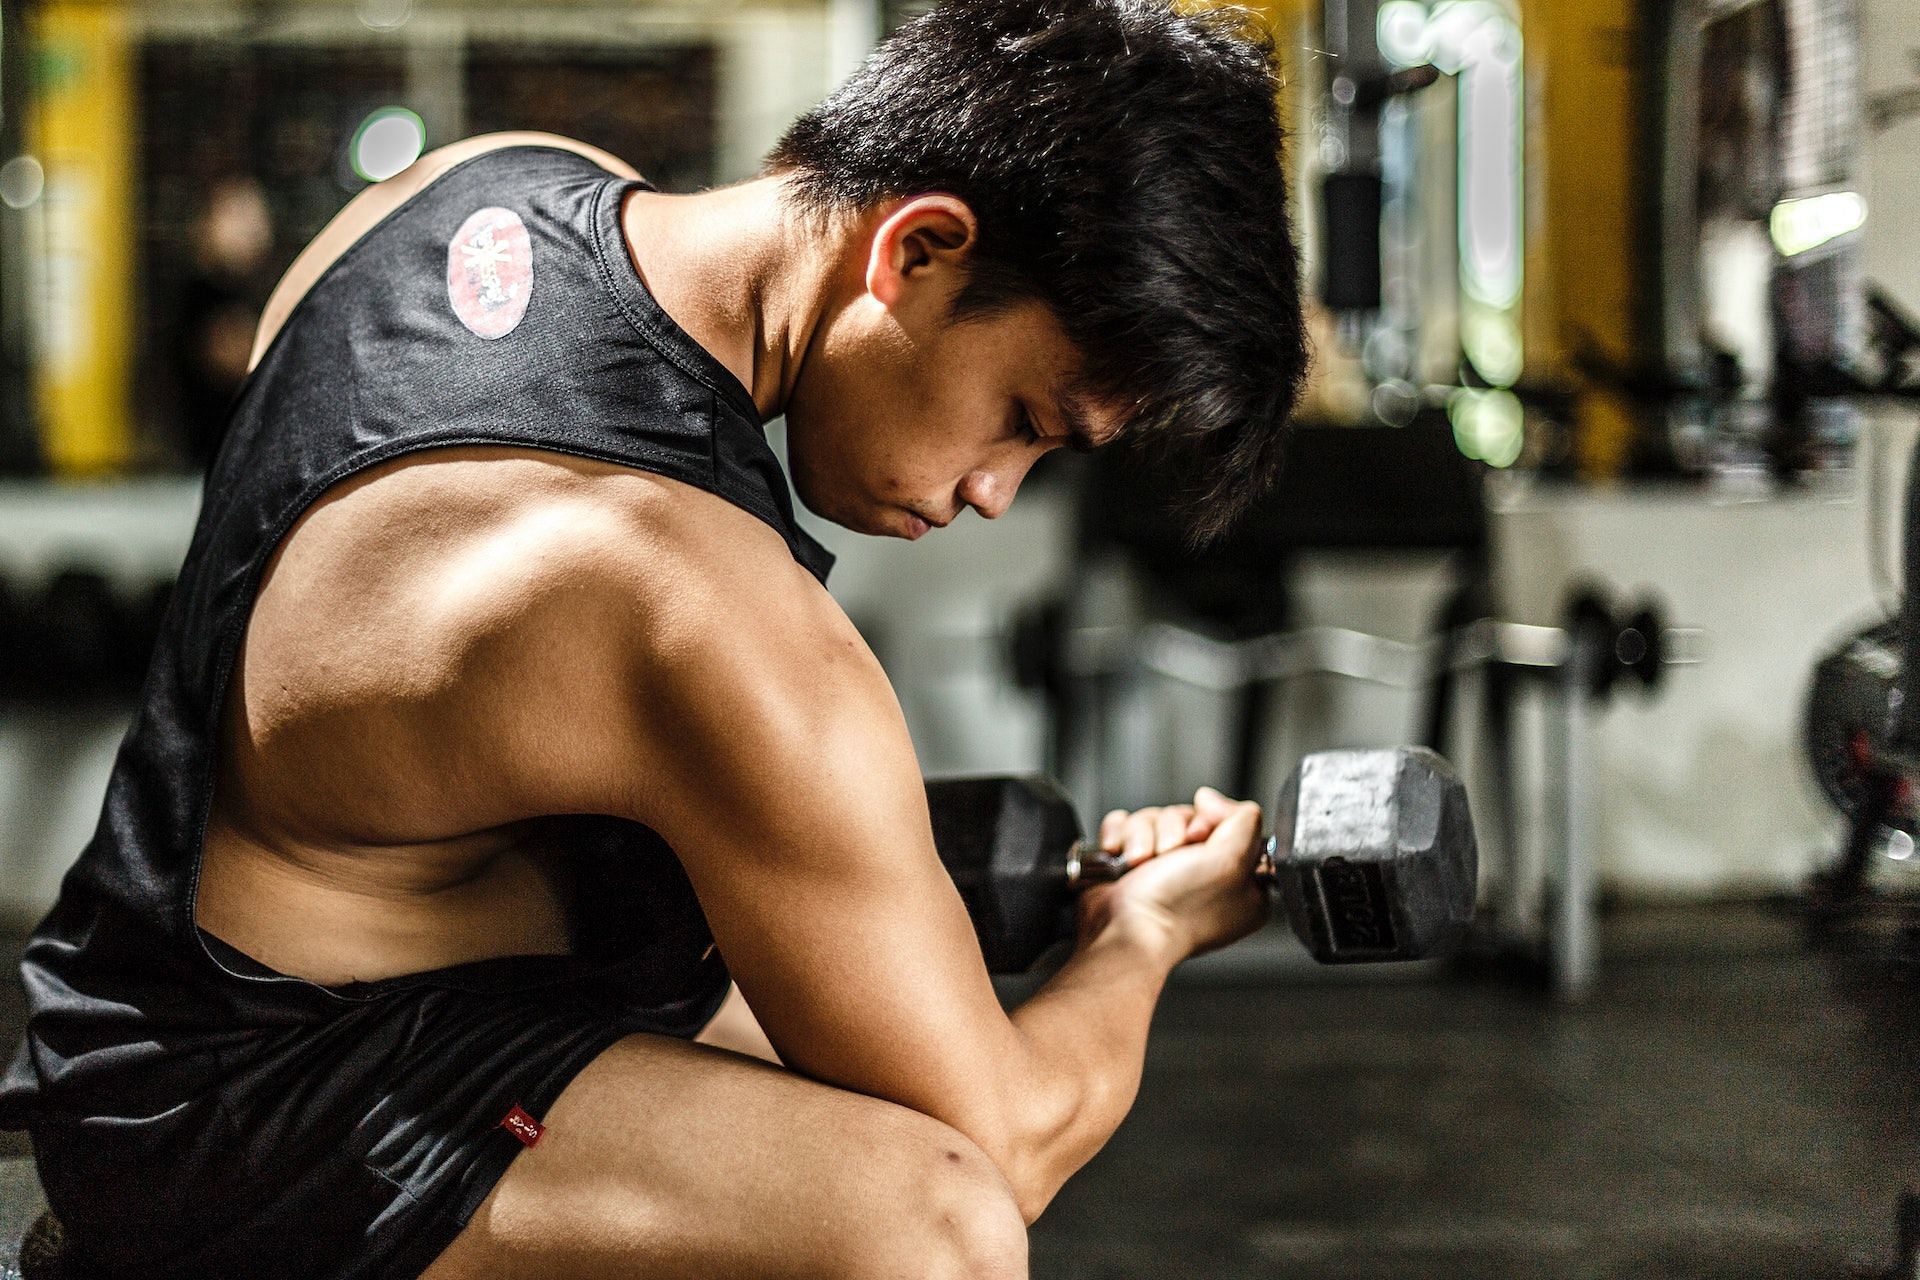 Bent-arm dumbbell row targets the biceps, triceps, shoulders, and lats. (Photo via Pexels/Timothy)